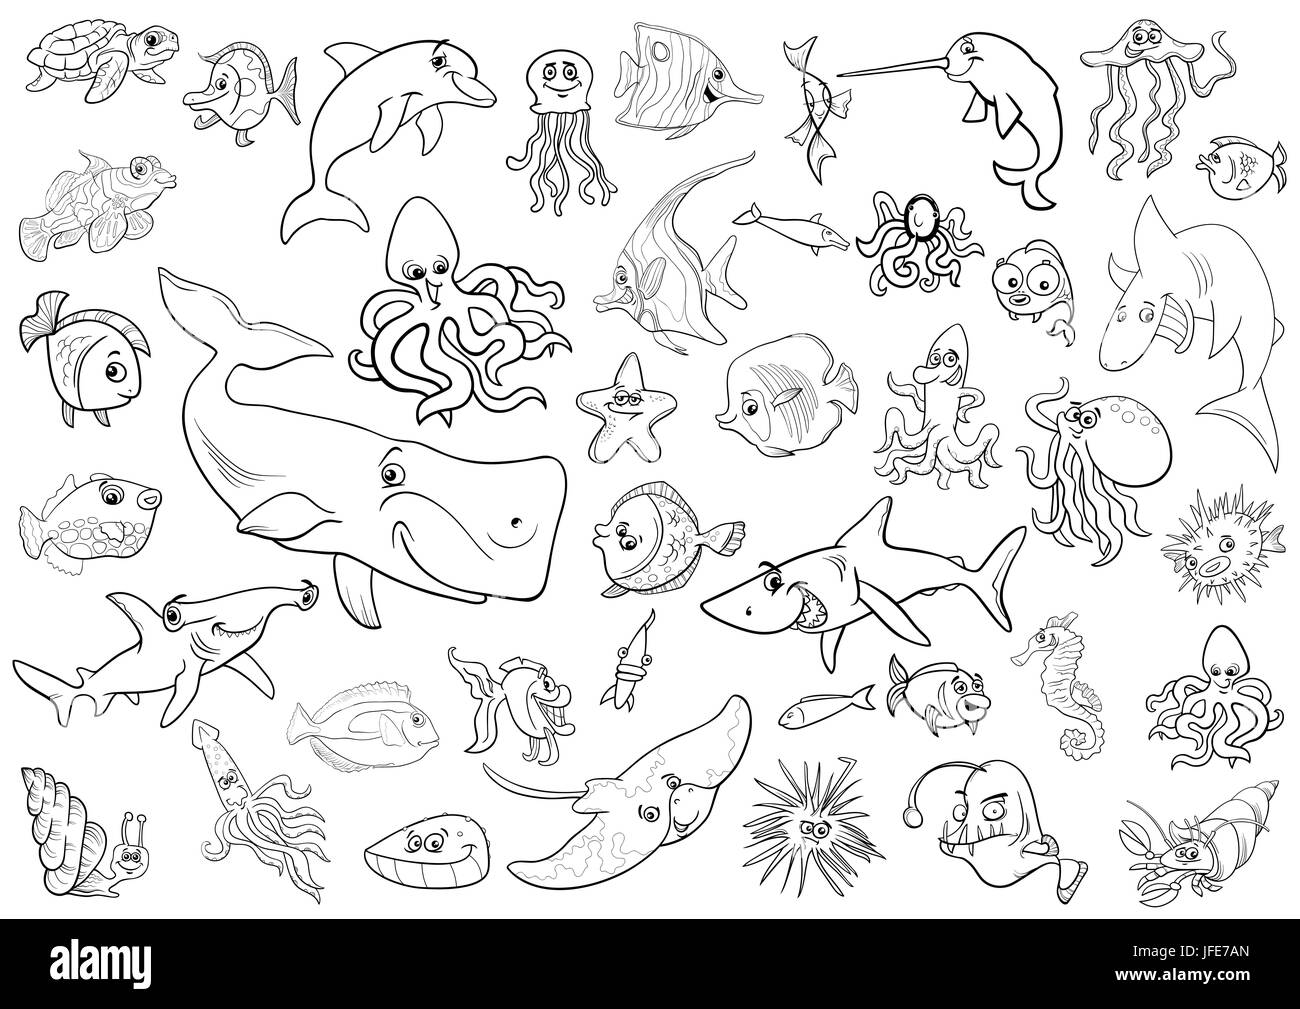 sea life animals coloring page Stock Photo   Alamy